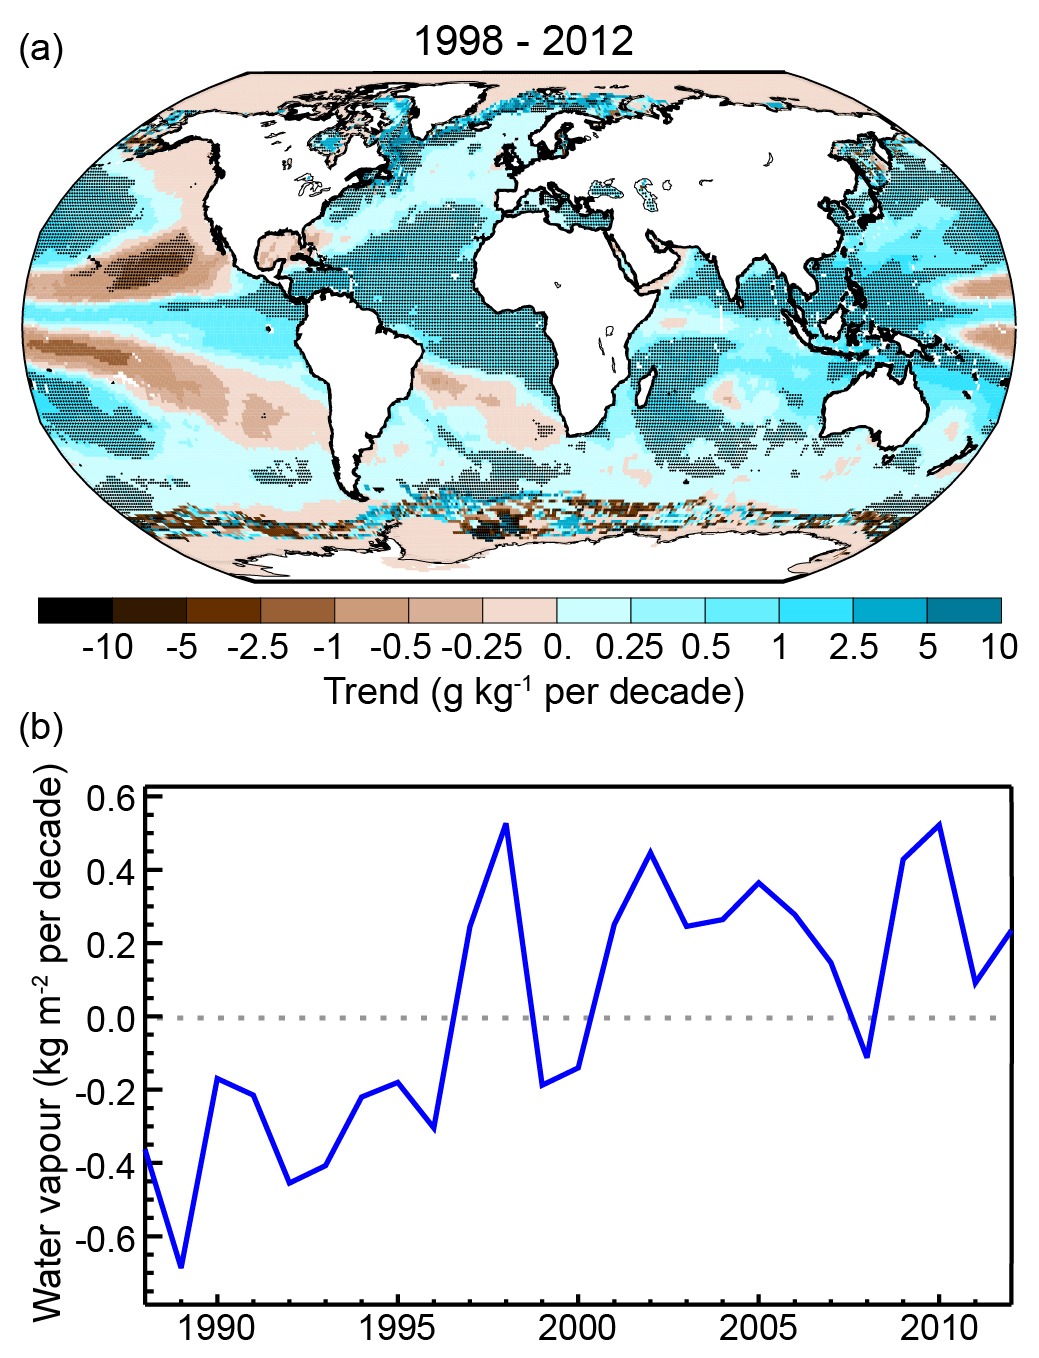 (a) Observed changes in surface specific humidity estimated from satellites. Dark shading indicates significant changes. (b) Changes in globally averaged water vapor content. From Harmann et al. (2013). Image from ipcc.ch.